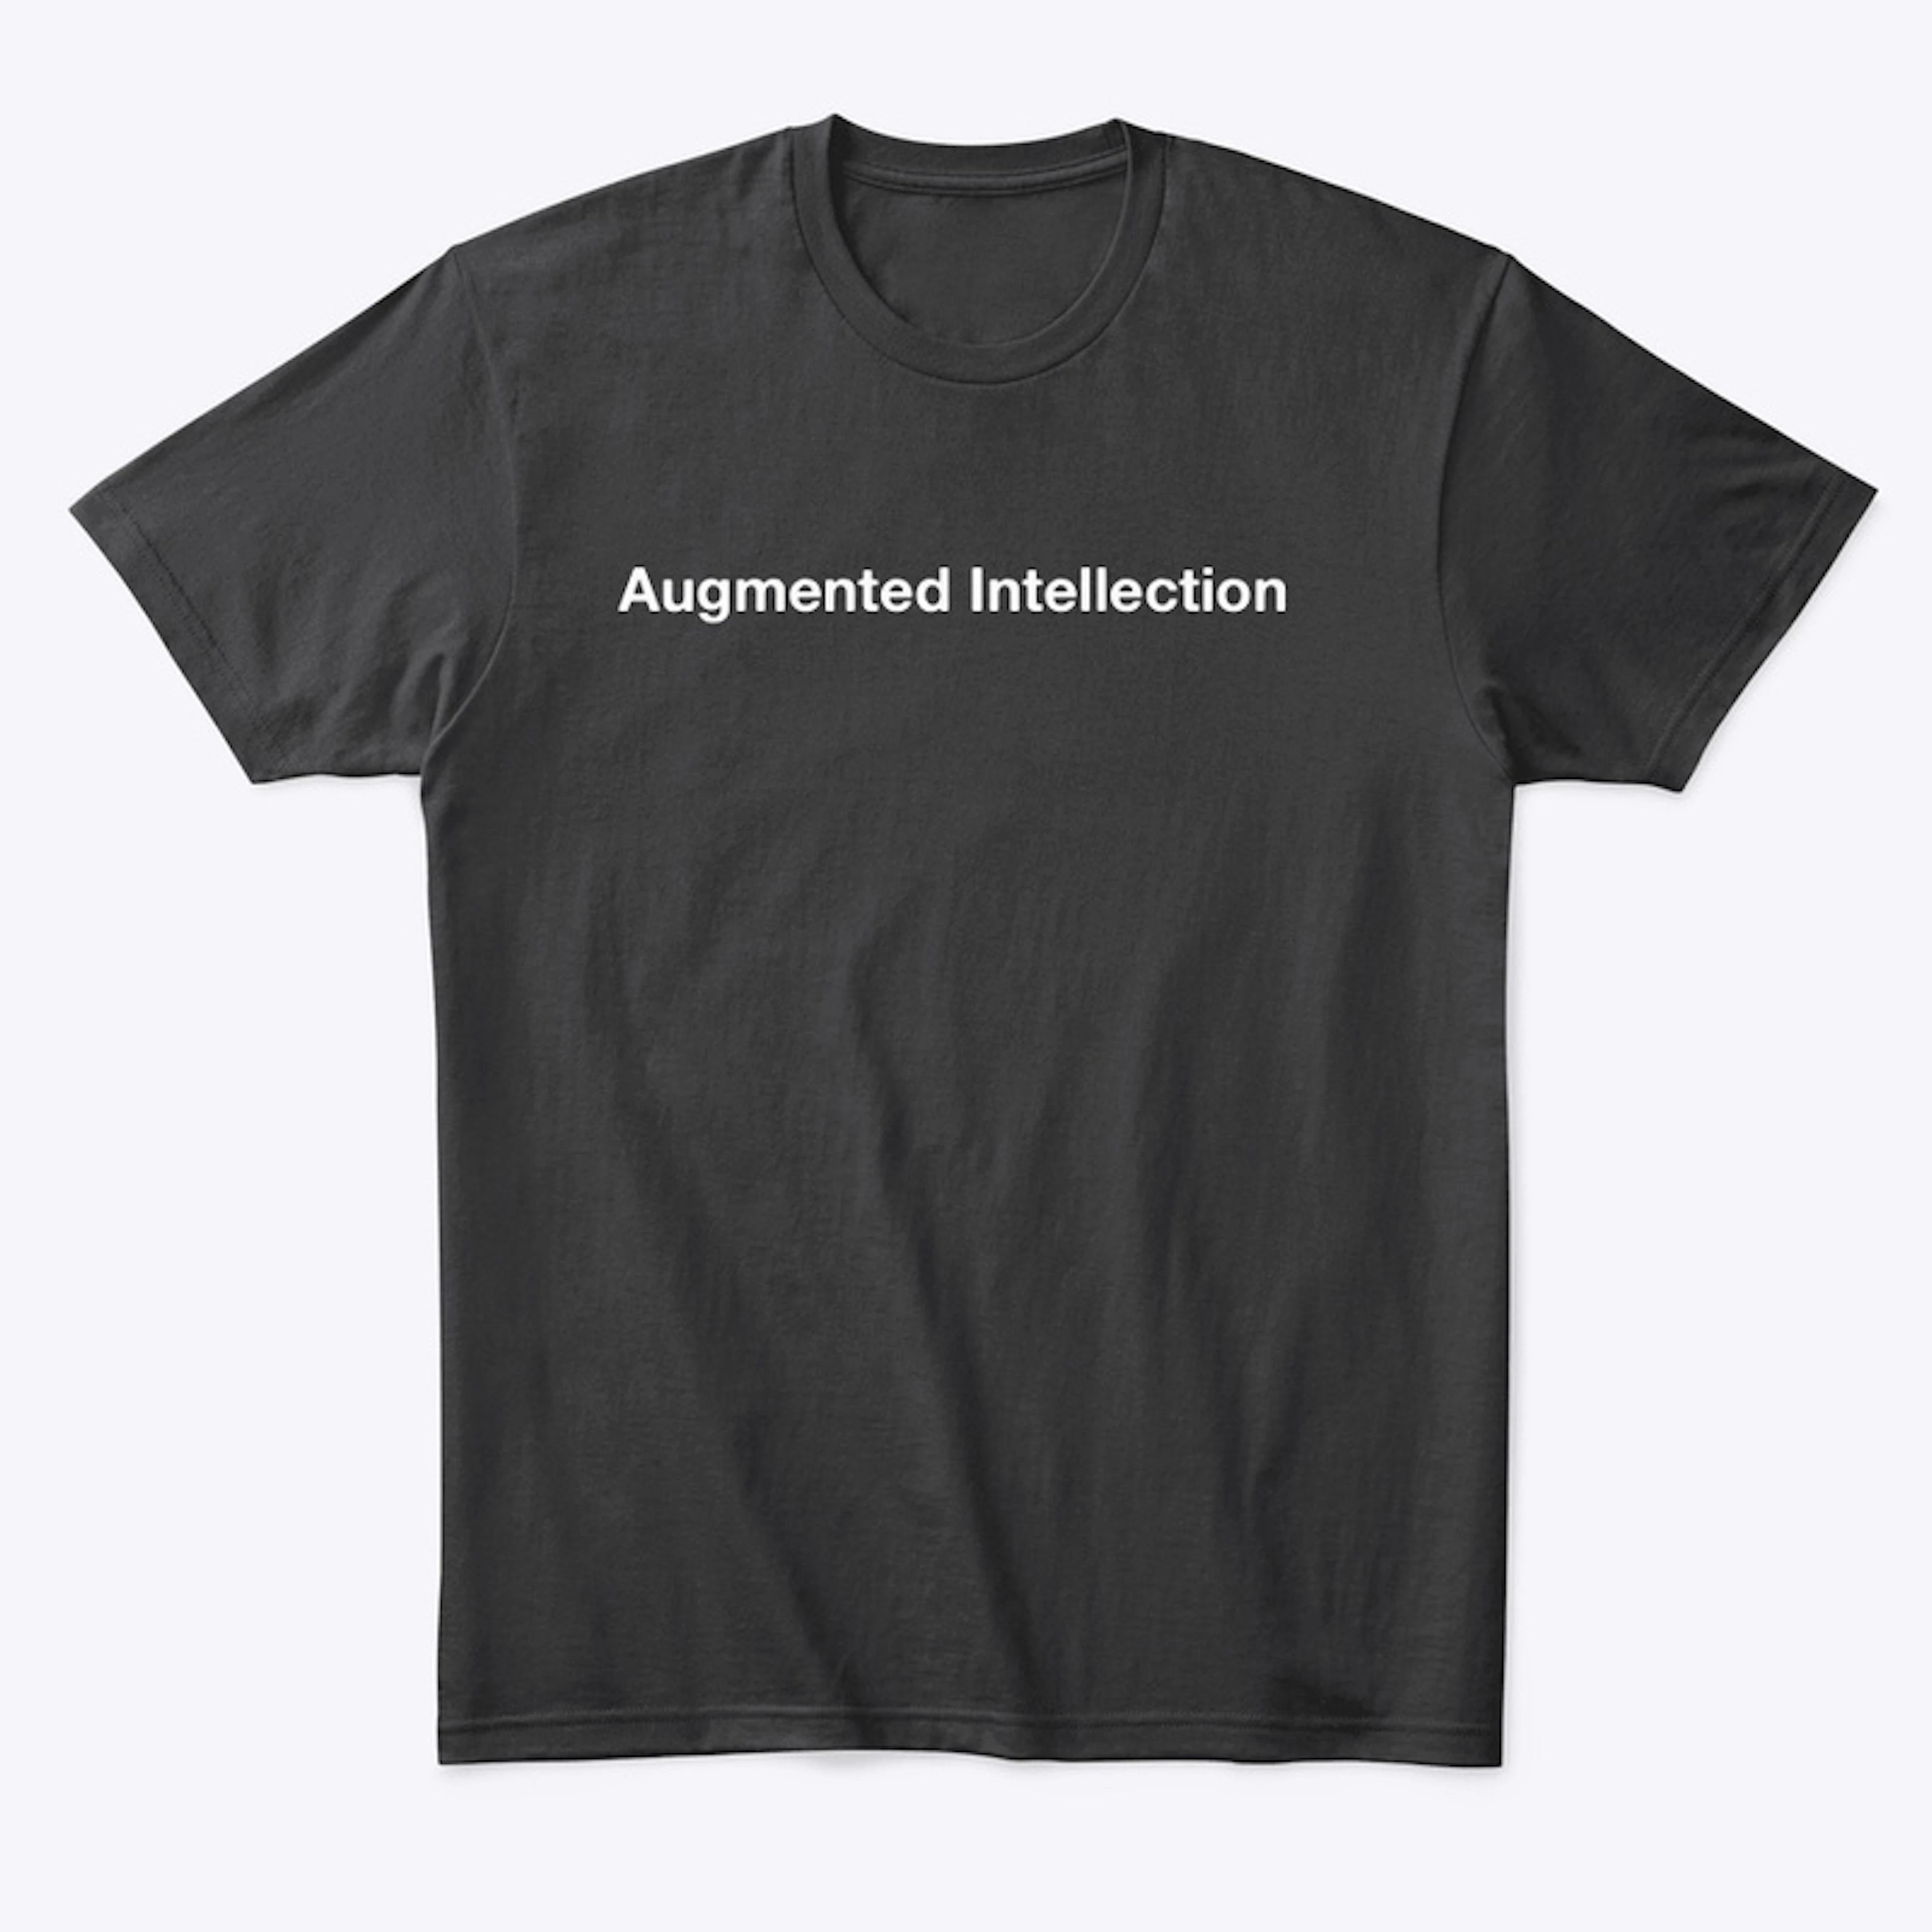 Augmented Intellection